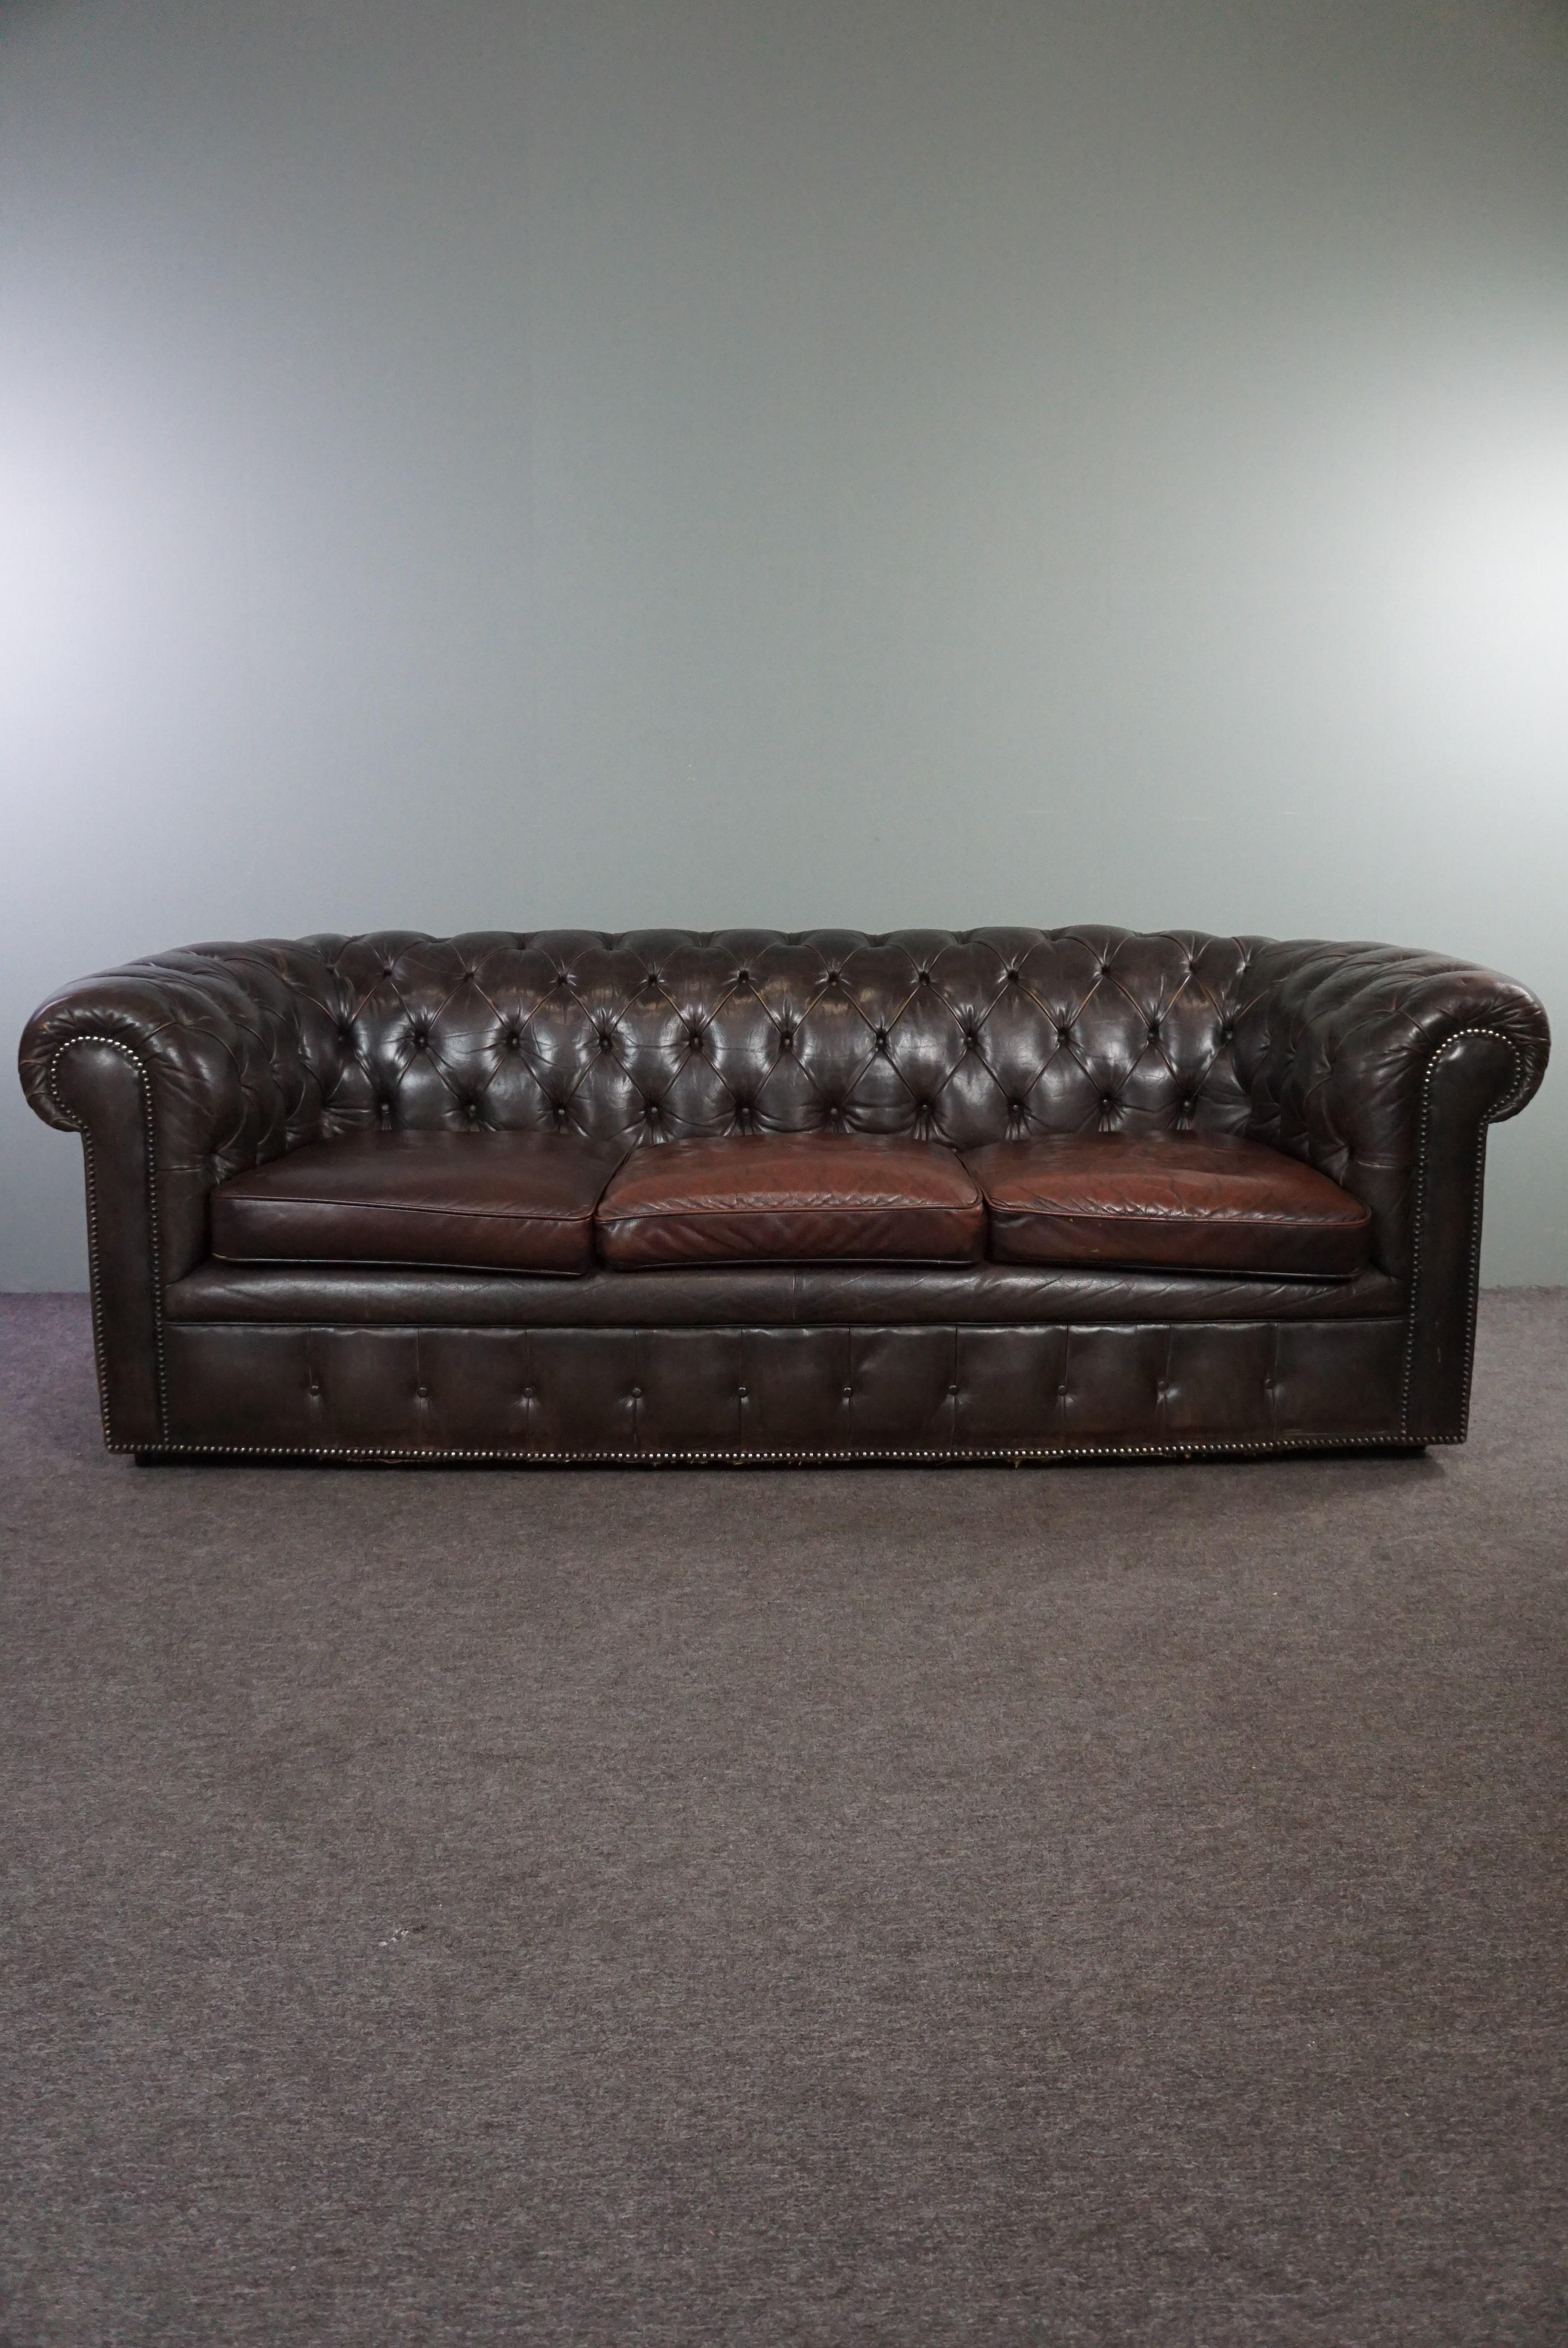 Offered is this wonderfully comfortable cowhide 3-seater Chesterfield sofa with an amazing appearance due to its patina and design.

This beautiful Chesterfield filled with horsehair has aged in a very beautiful way.
Anyone who takes this unique